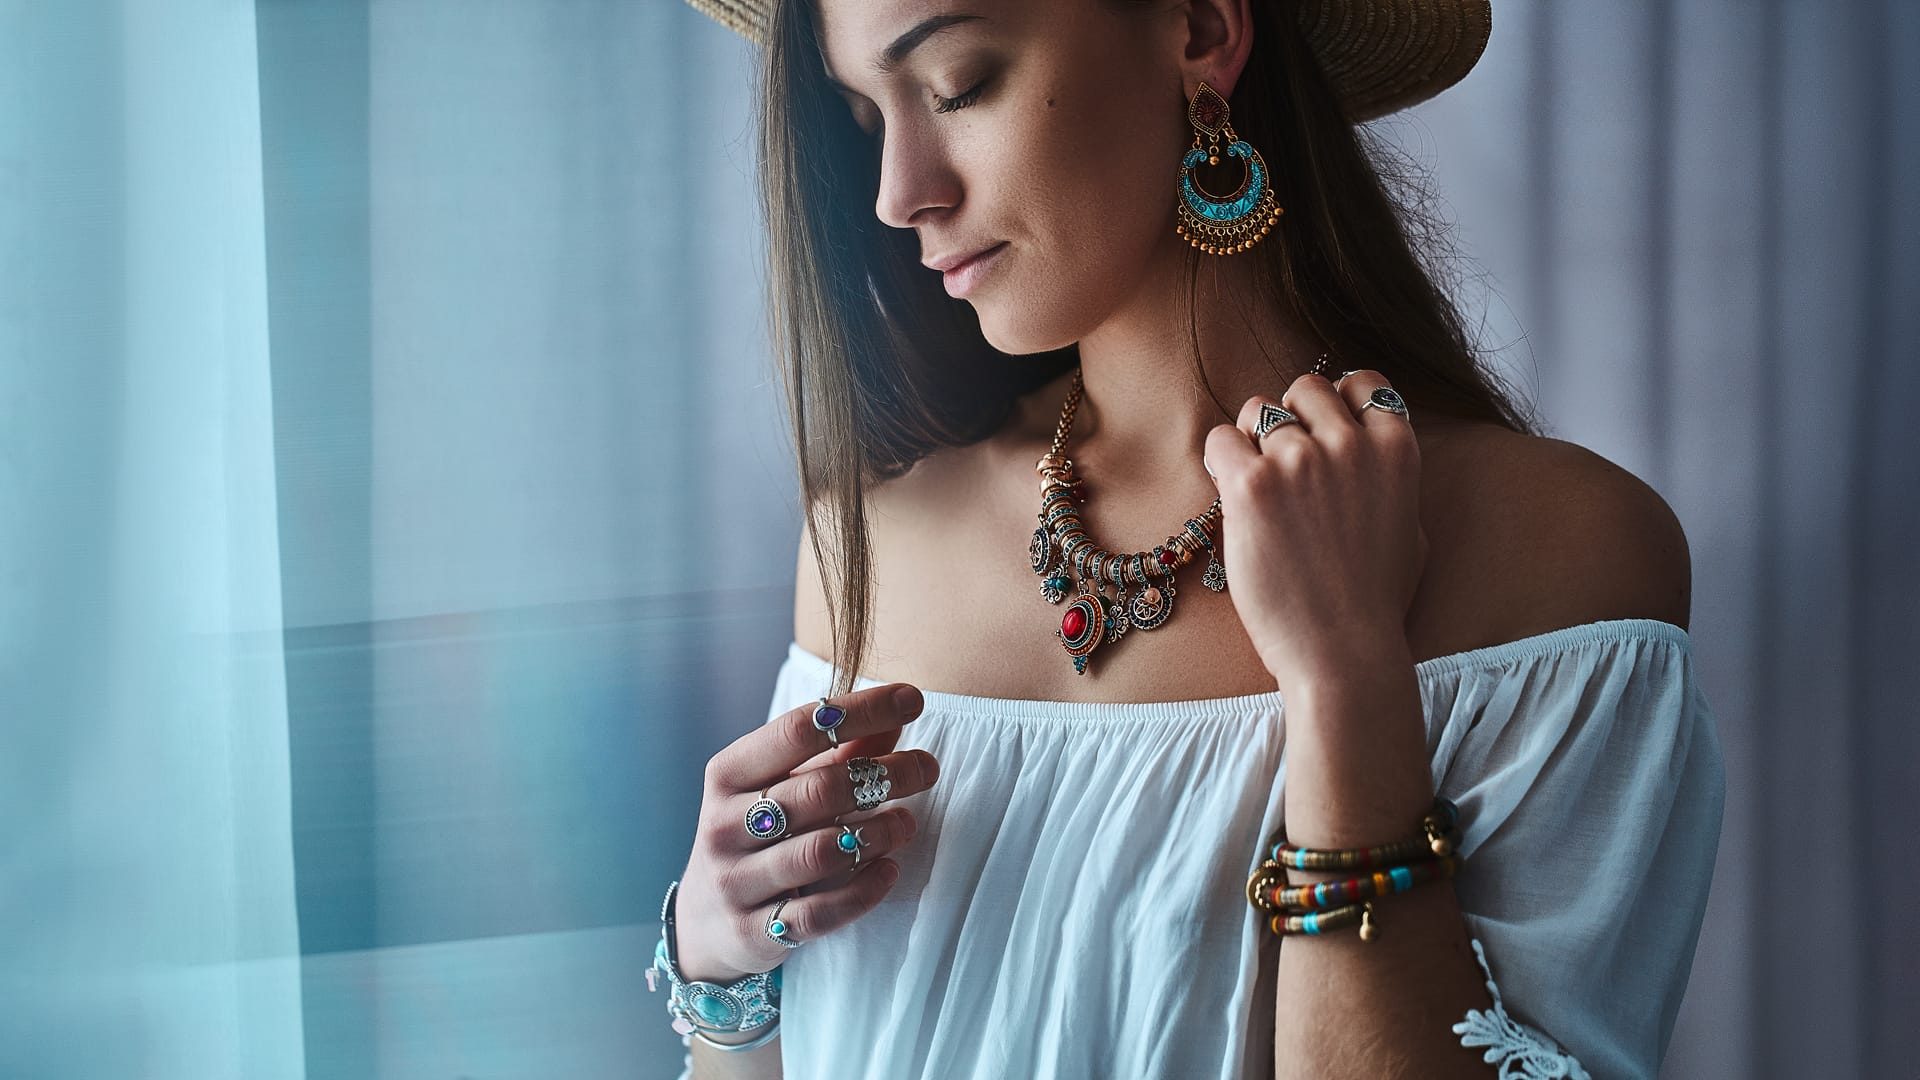 Bracelets golden necklace silver rings fashionable hippie gypsy bohemian outfit with jewelry details